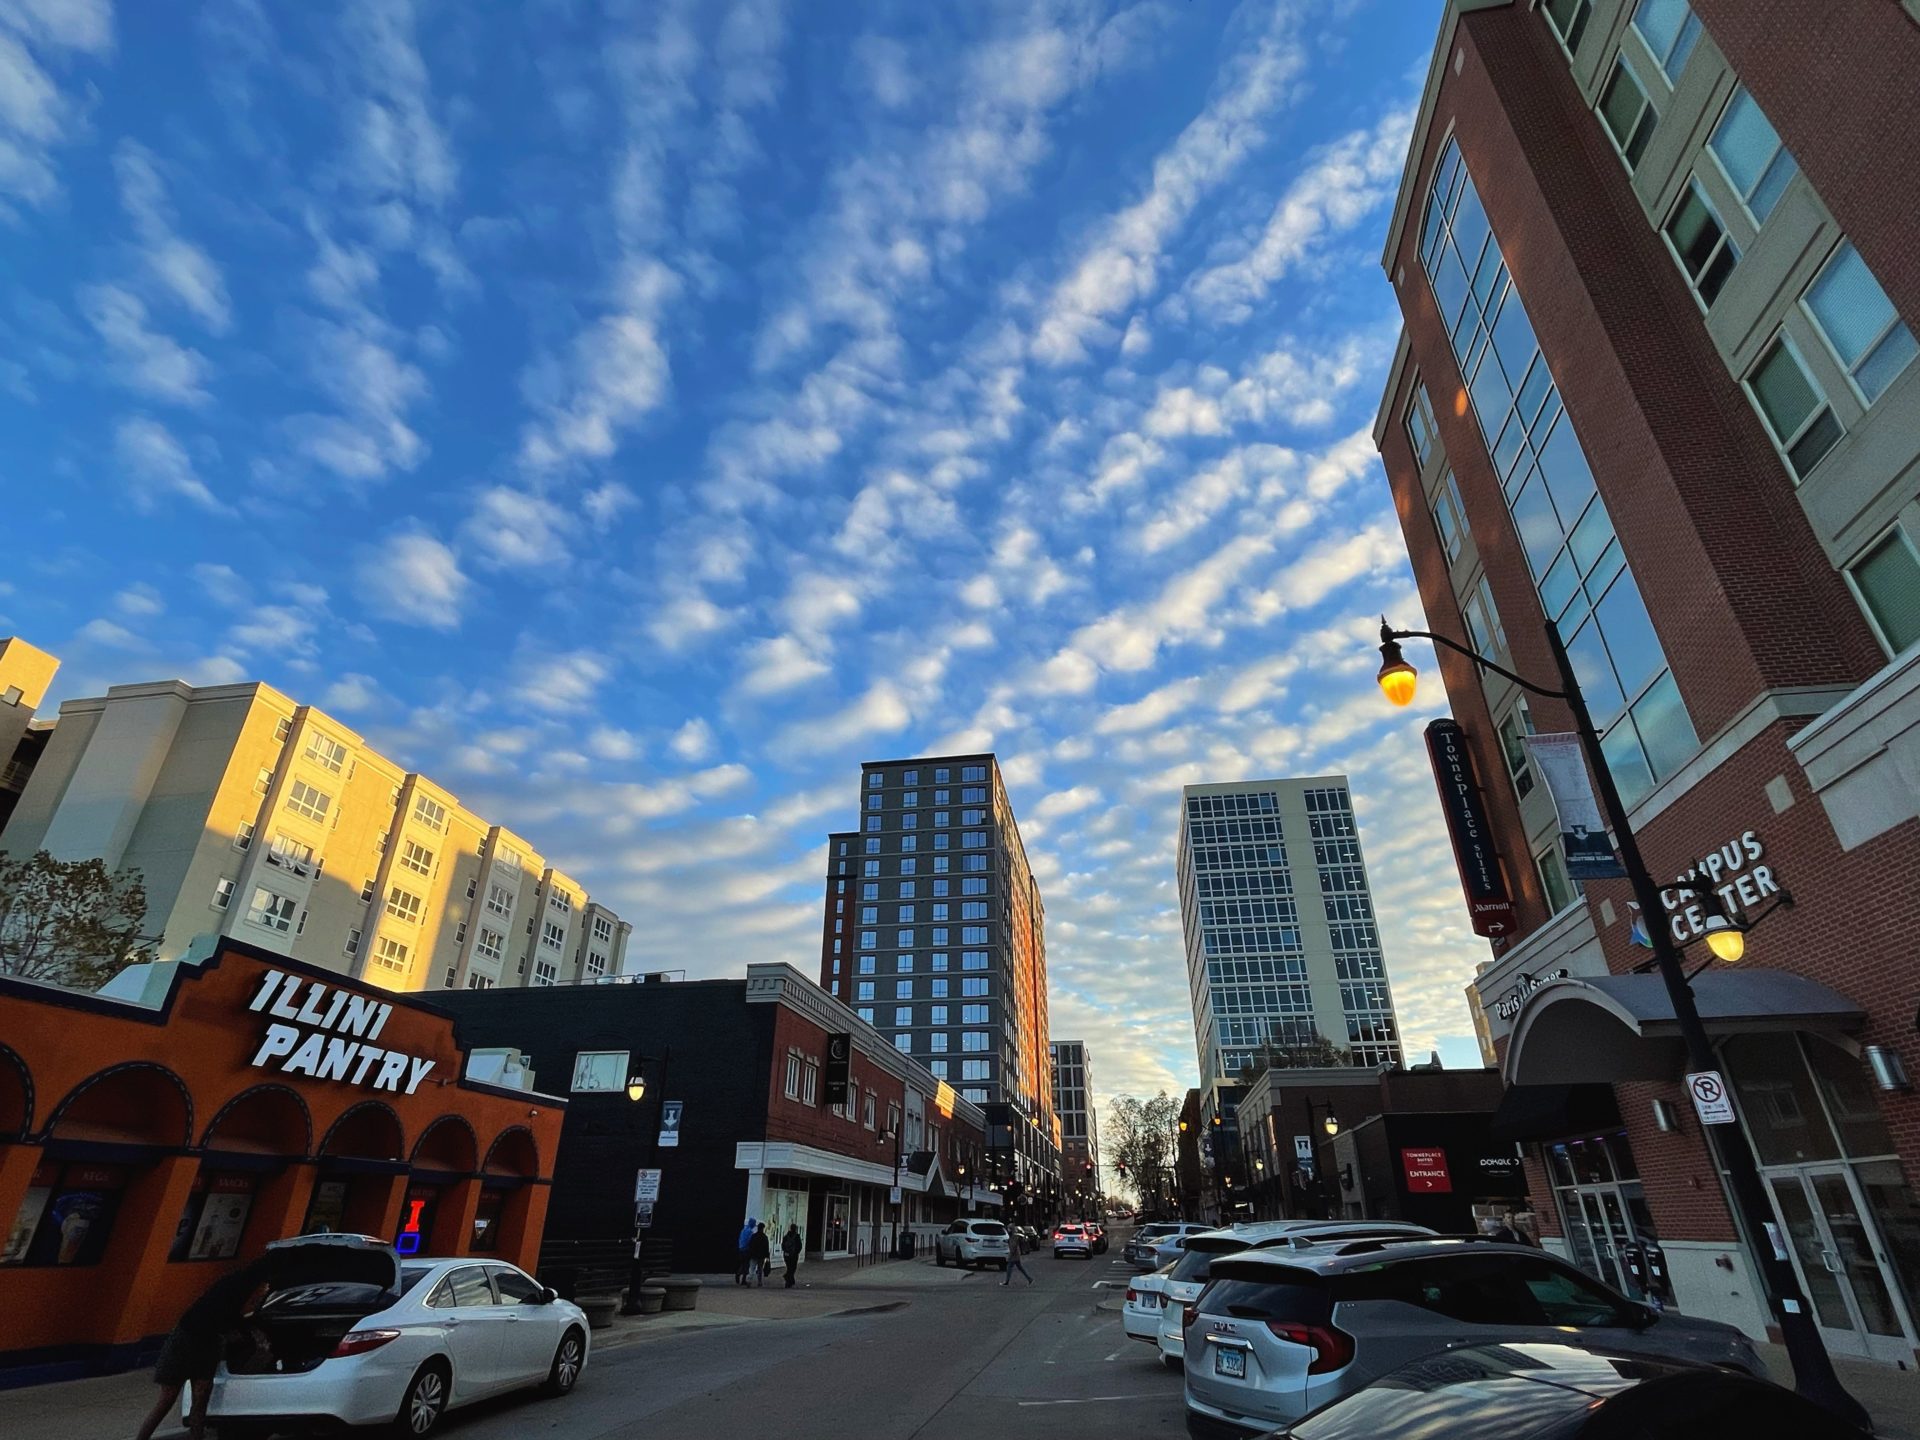 A fish eye view of Campustown, with tall buildings along the horizon and a blue sky streaked with thin white clouds.